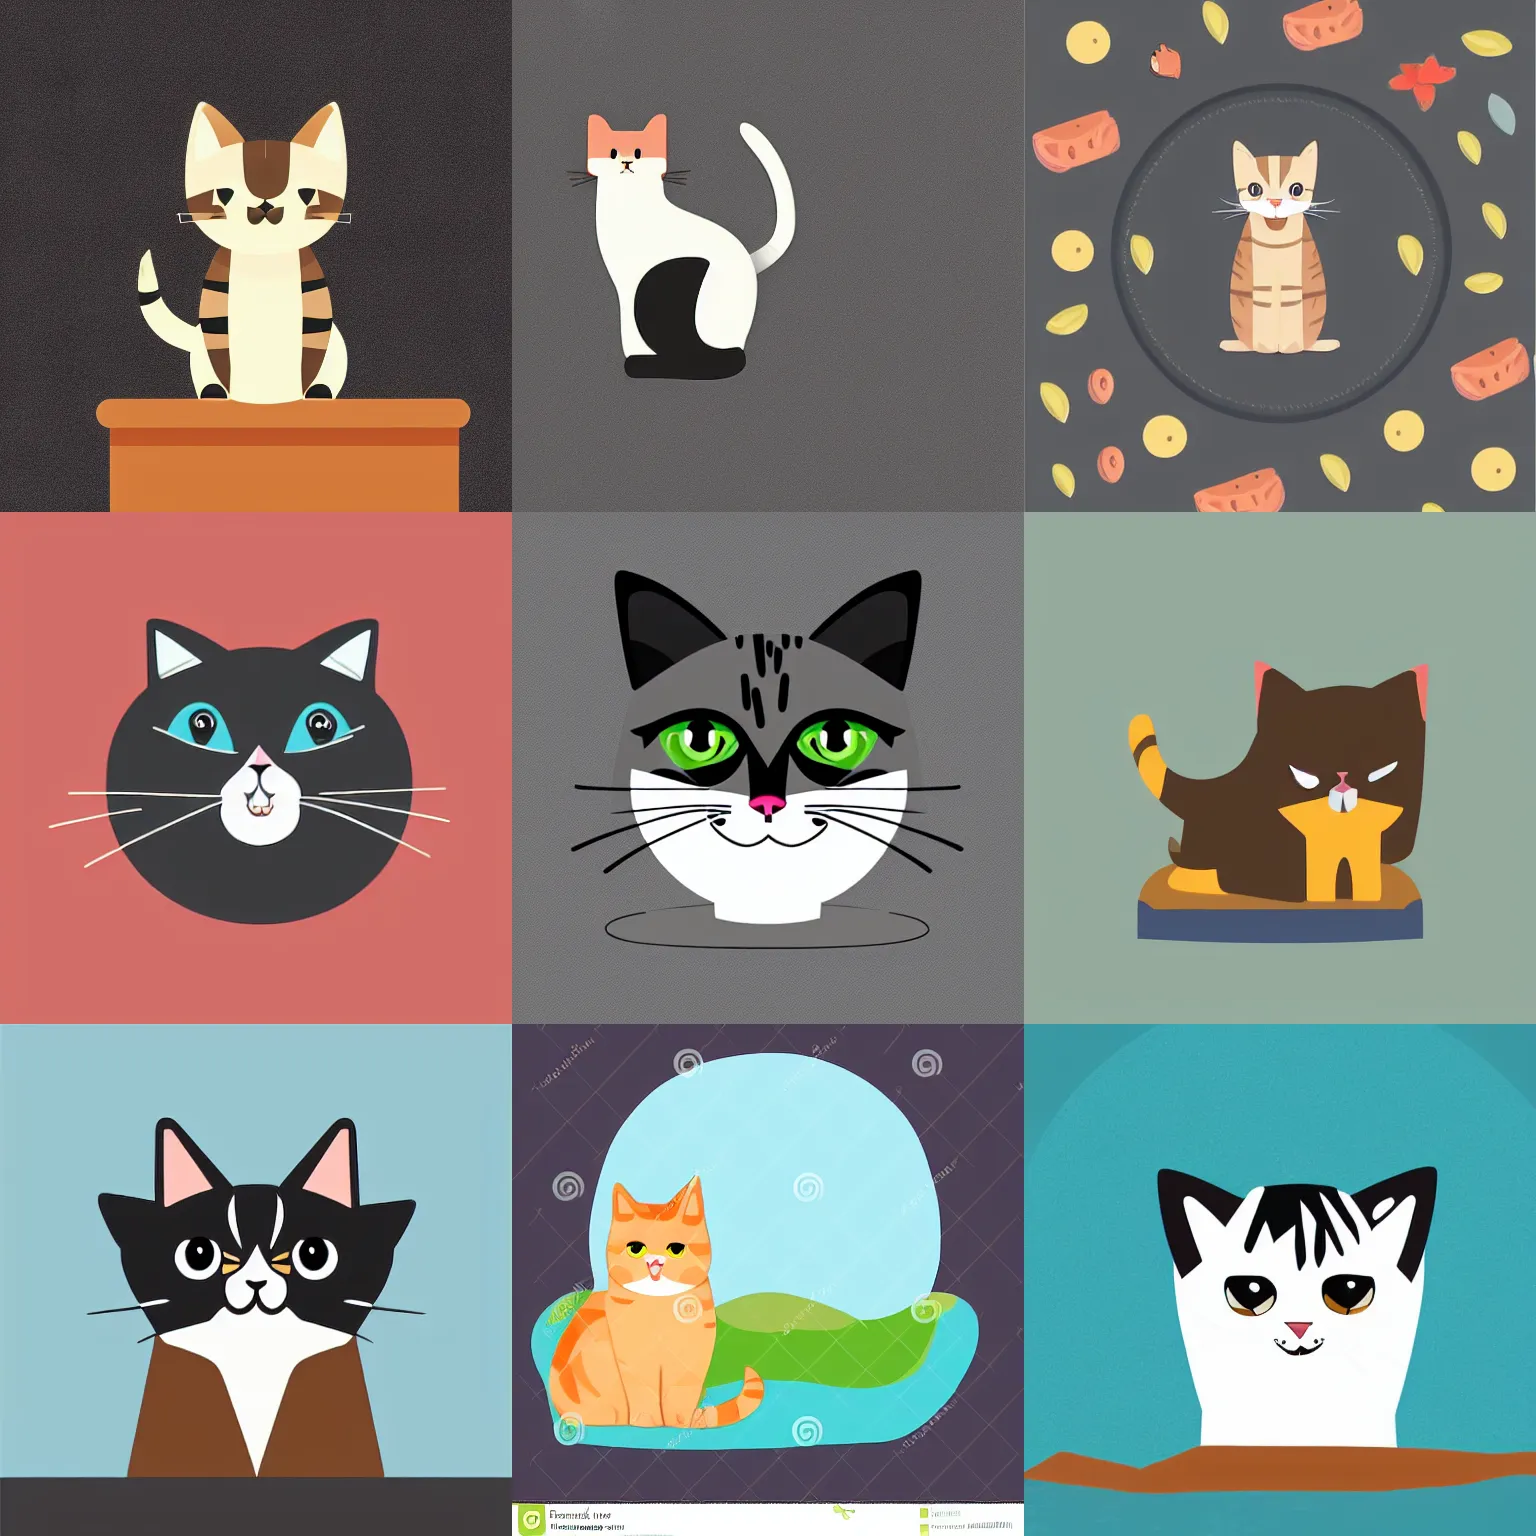 Prompt: a flat design vector illustration of an adorable cat that is on a plateau